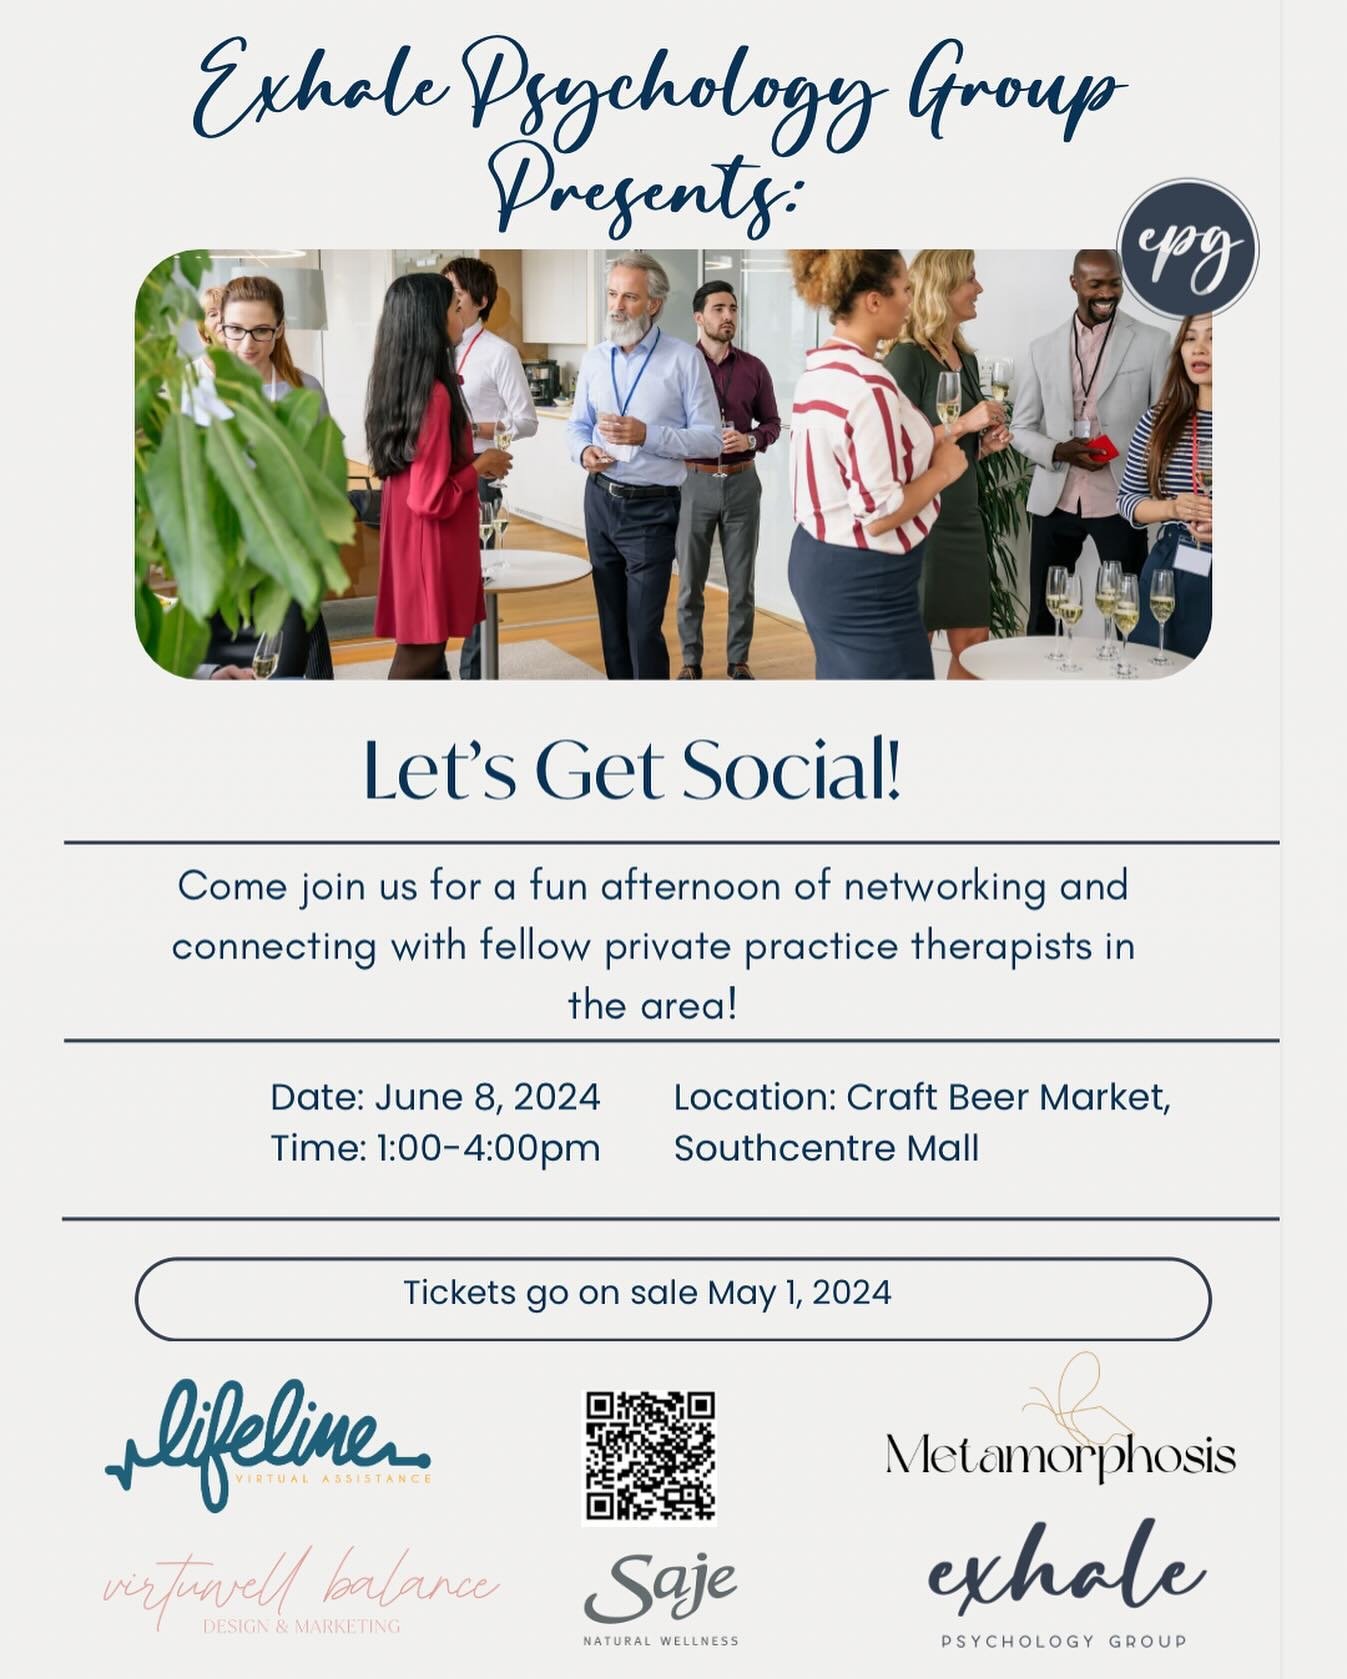 ✨Calling all local therapists in private practice✨

If you&rsquo;re a psychologist, counsellor, mental health therapist, etc. in Calgary &amp; area, working in private practice - you don&rsquo;t want to miss this networking event!

Tickets include 2 